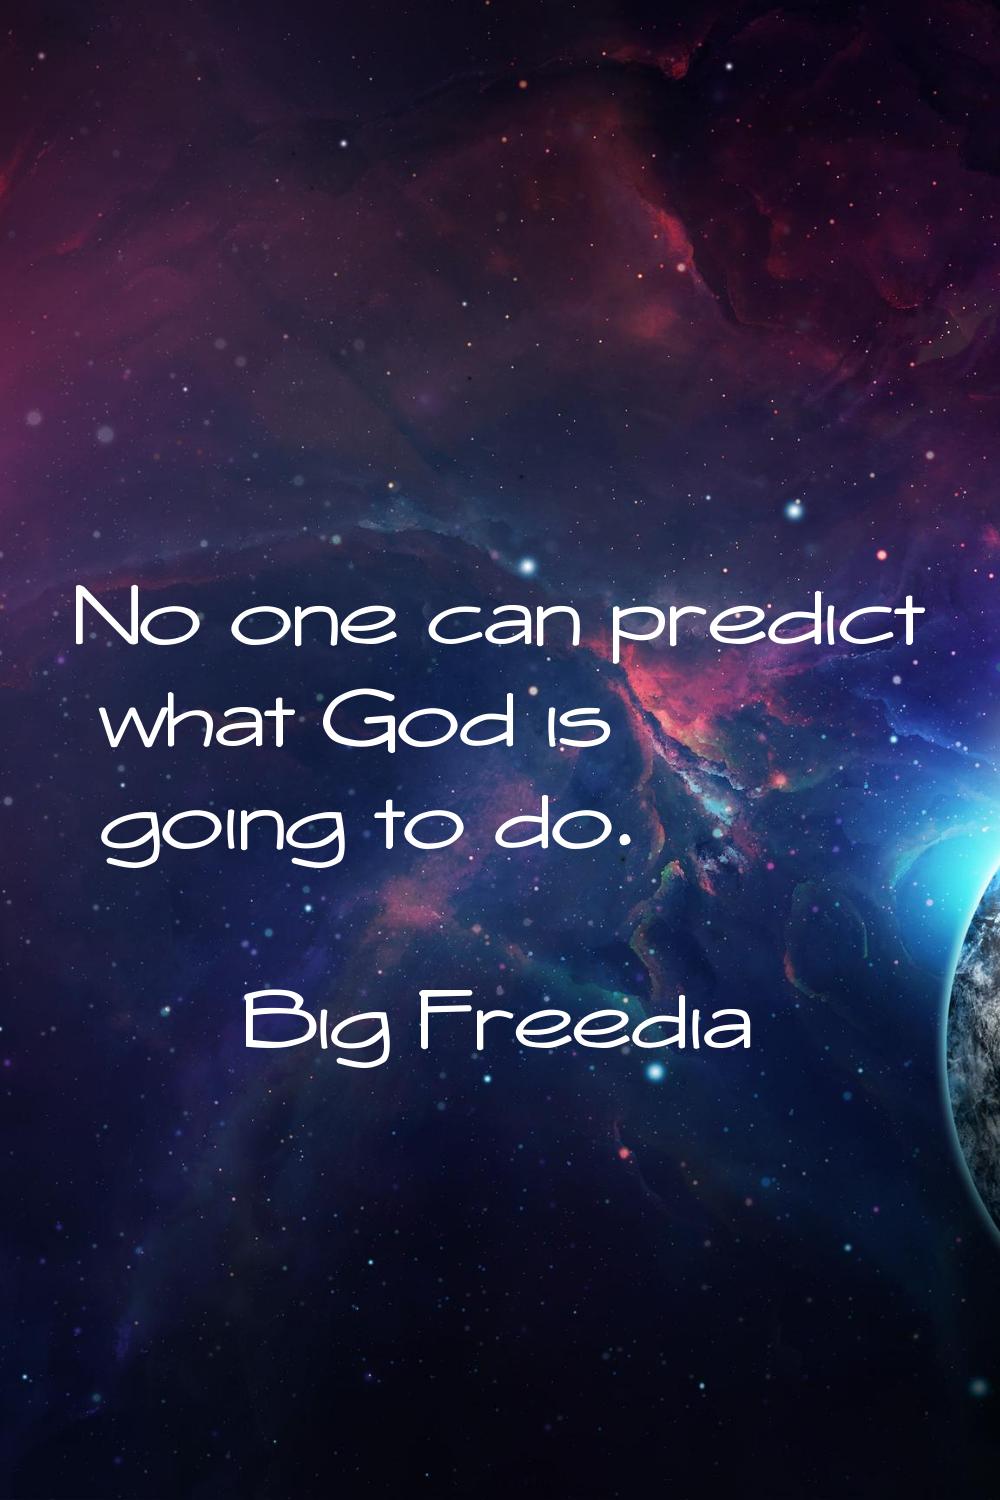 No one can predict what God is going to do.